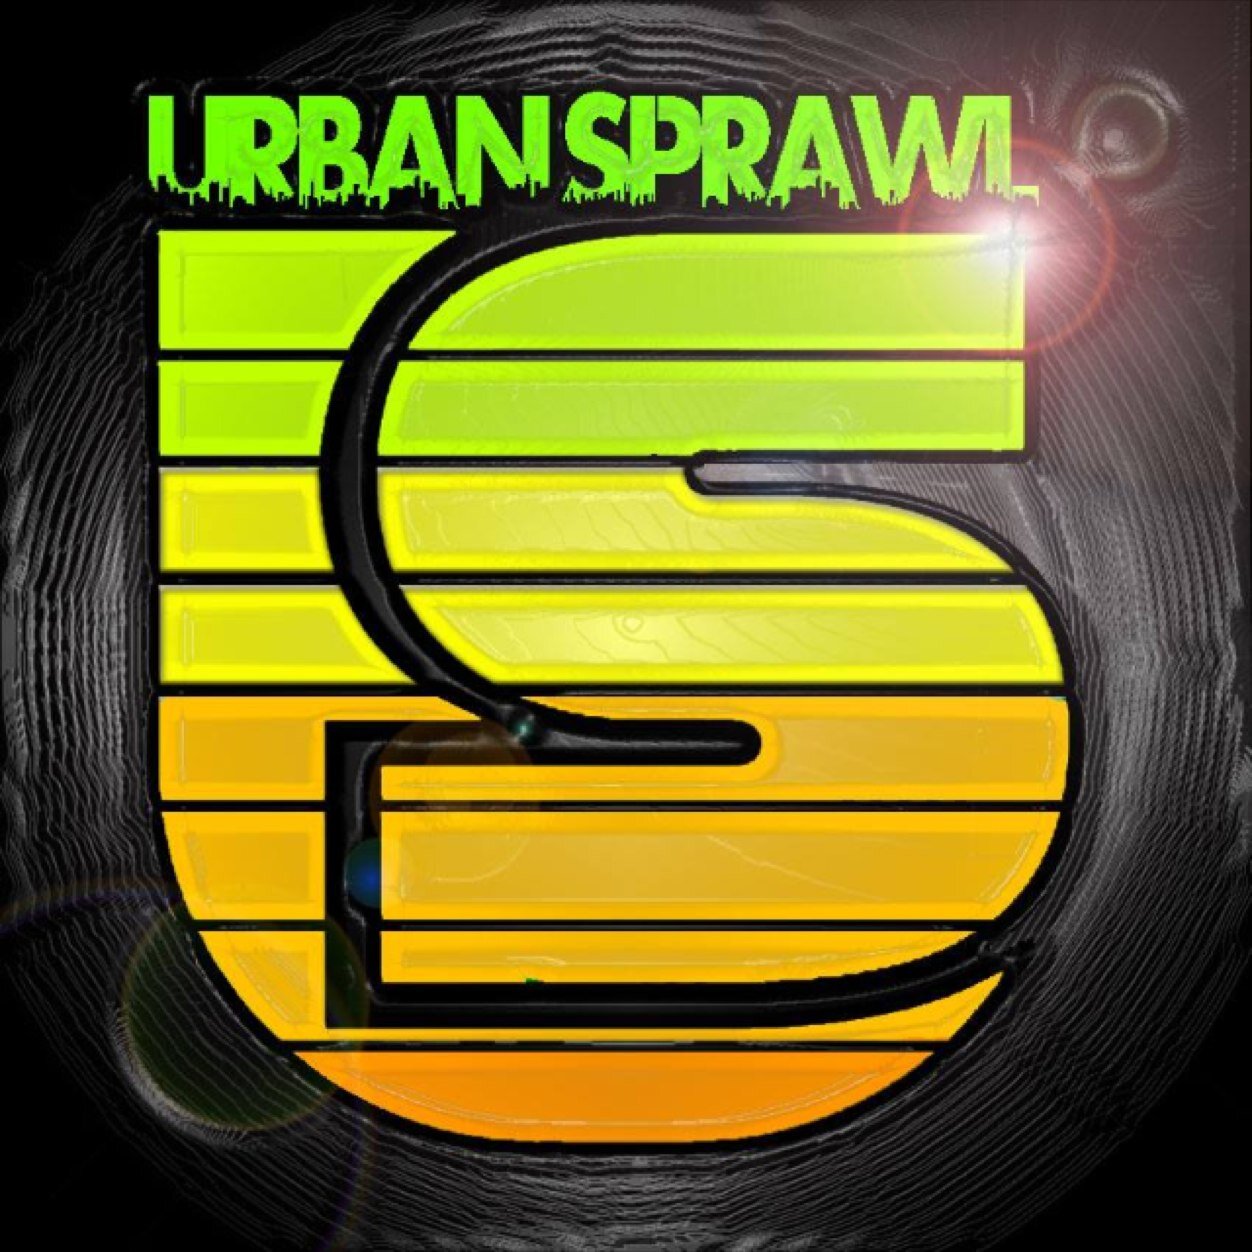 URBAN SPRAWL supply, sell and promote new Speed Garage to the masses through digital media, radio and select top flight DJ's